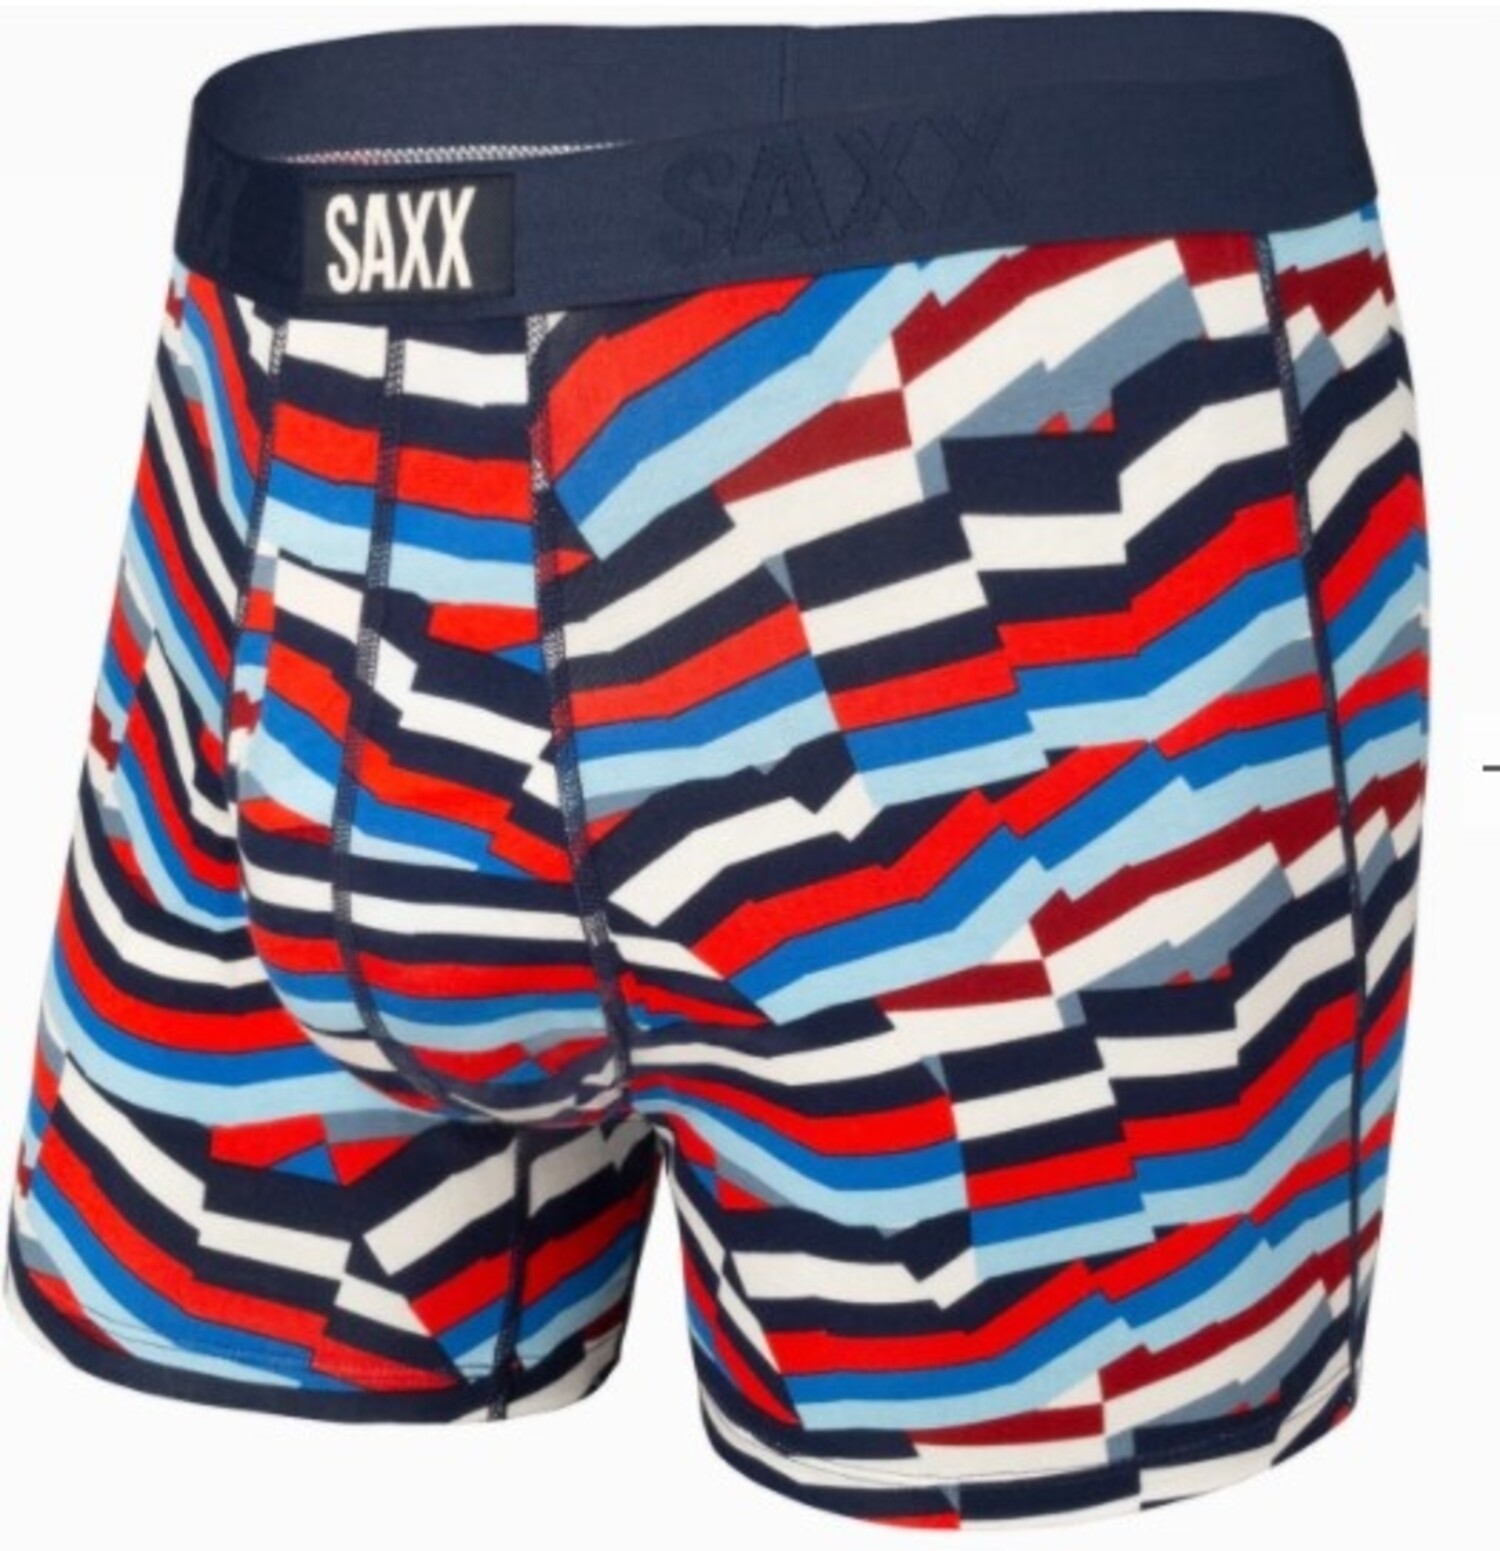 Guest Post: Product Review of Saxx Vibe Boxer Briefs by Jason - A  Sophisticated Notion